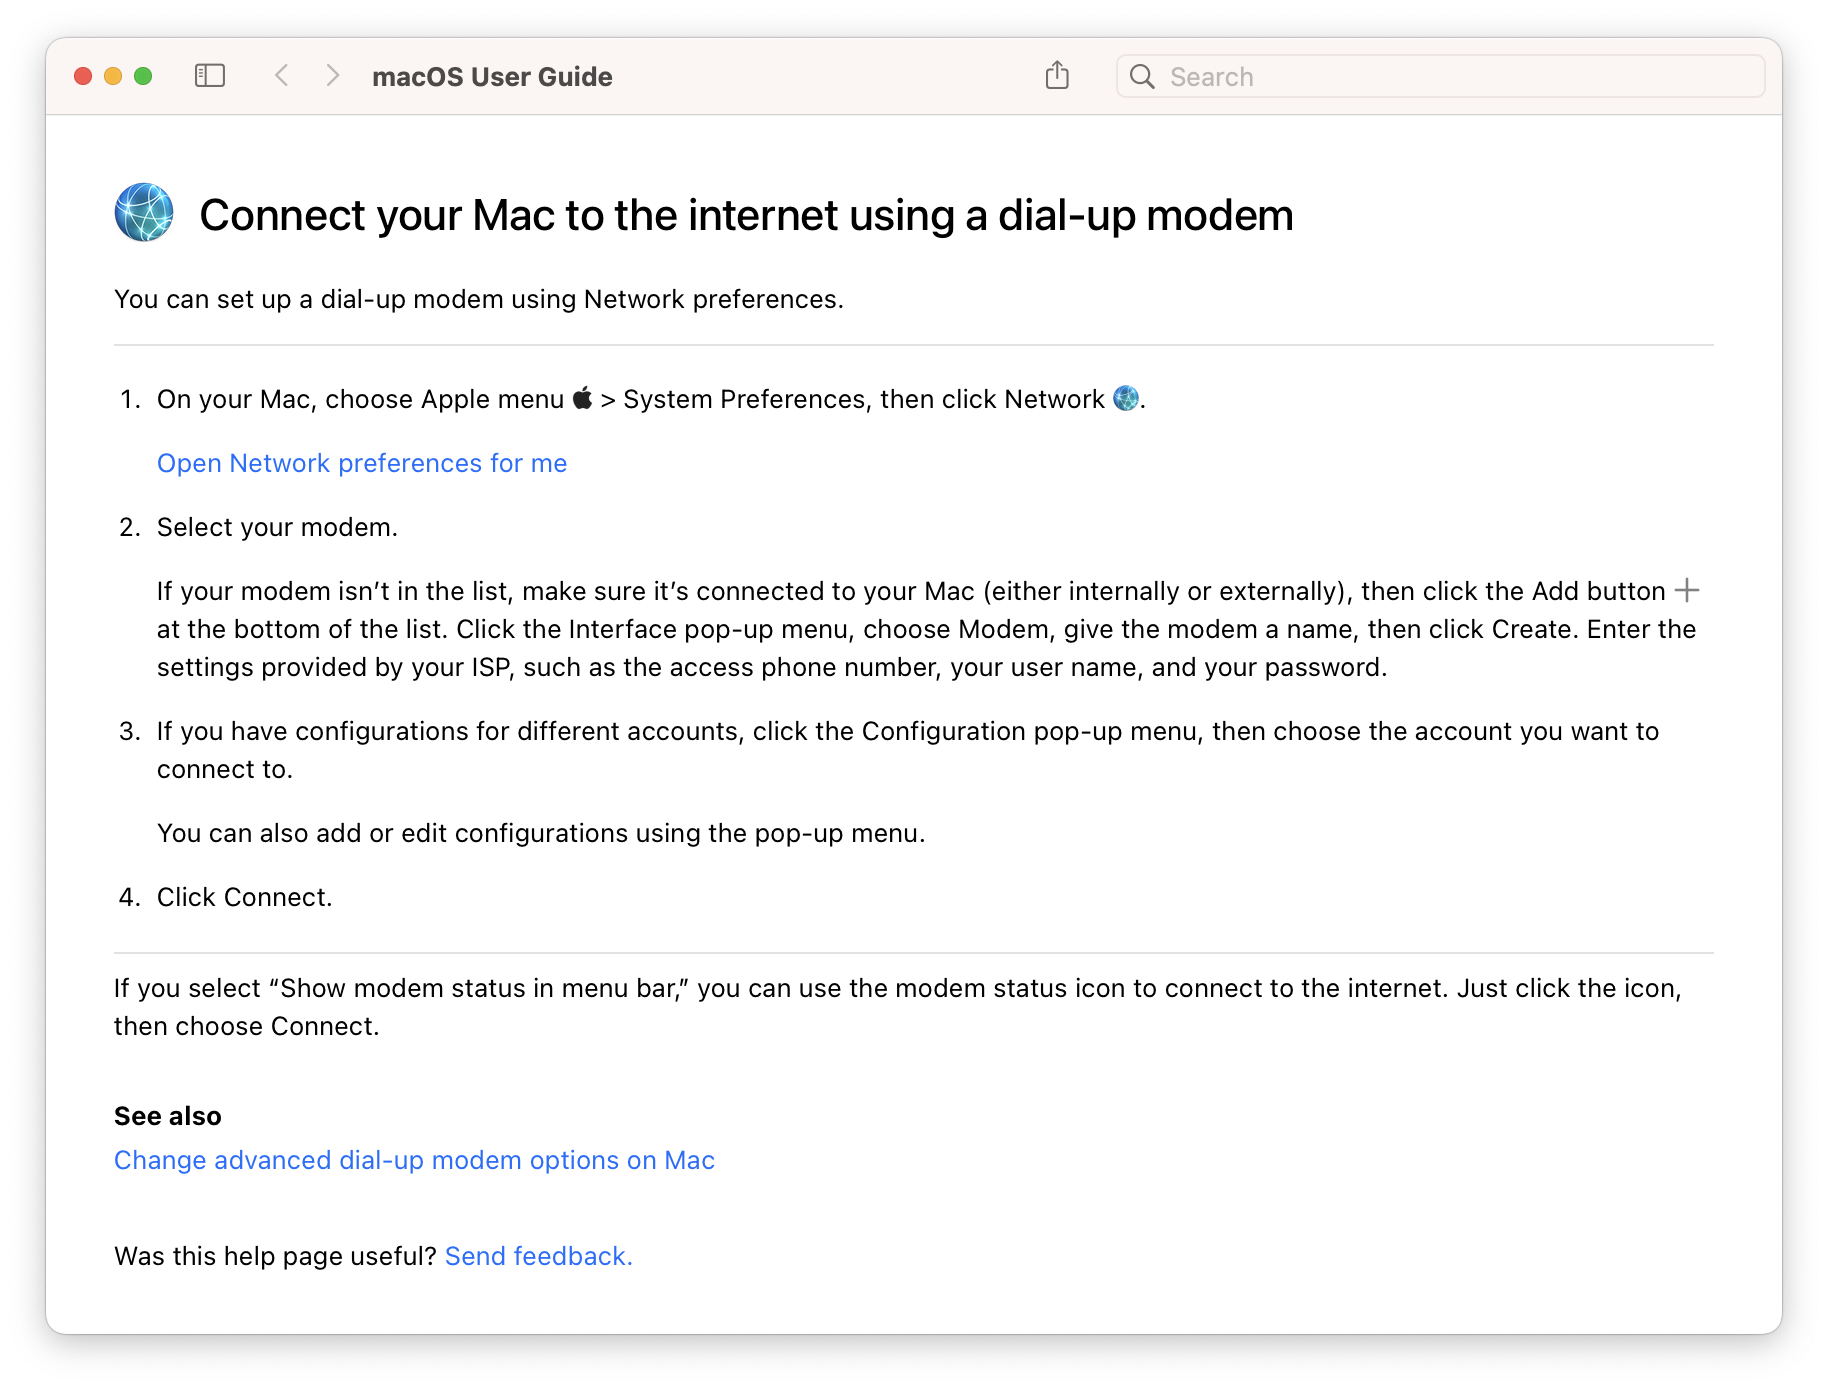 Sorry, Apple will no longer help you set up a dial-up modem on your Mac